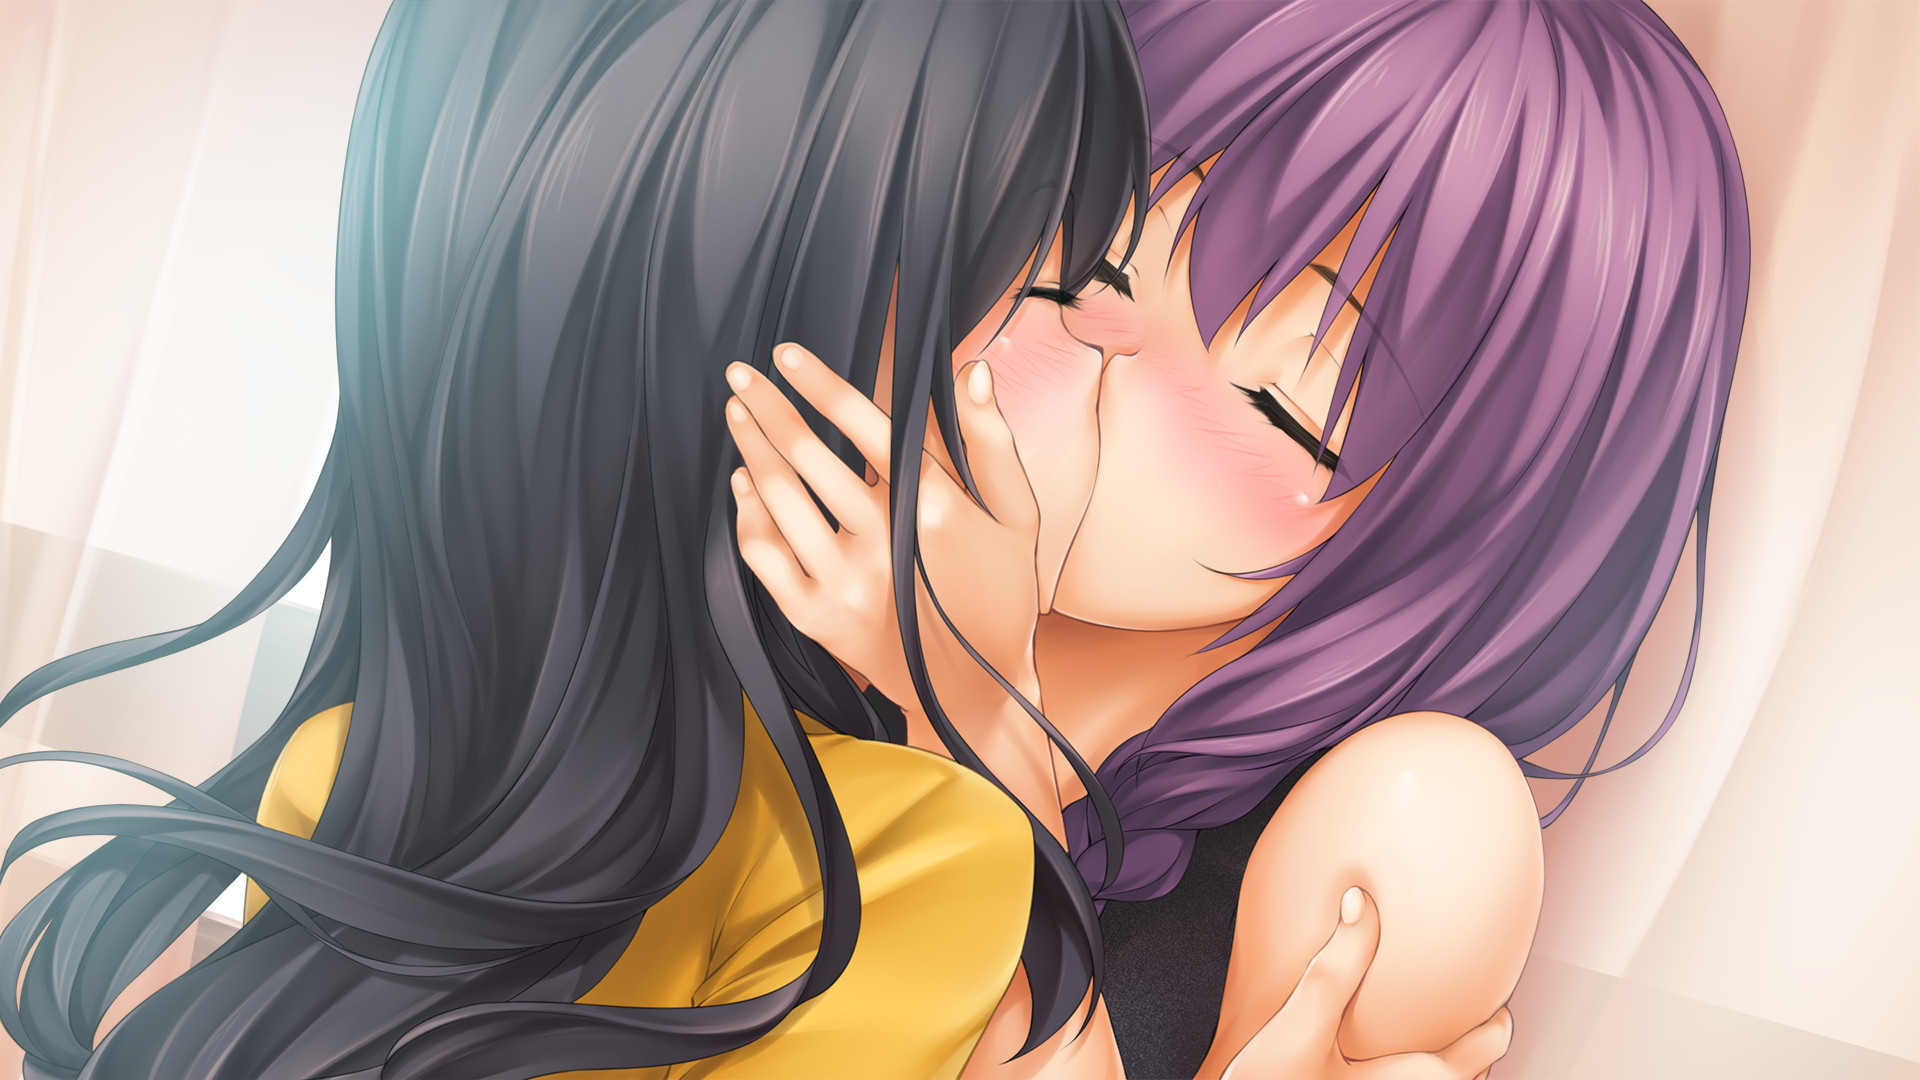 Download Free Hentai Game Porn Games Negligee: Love Stories